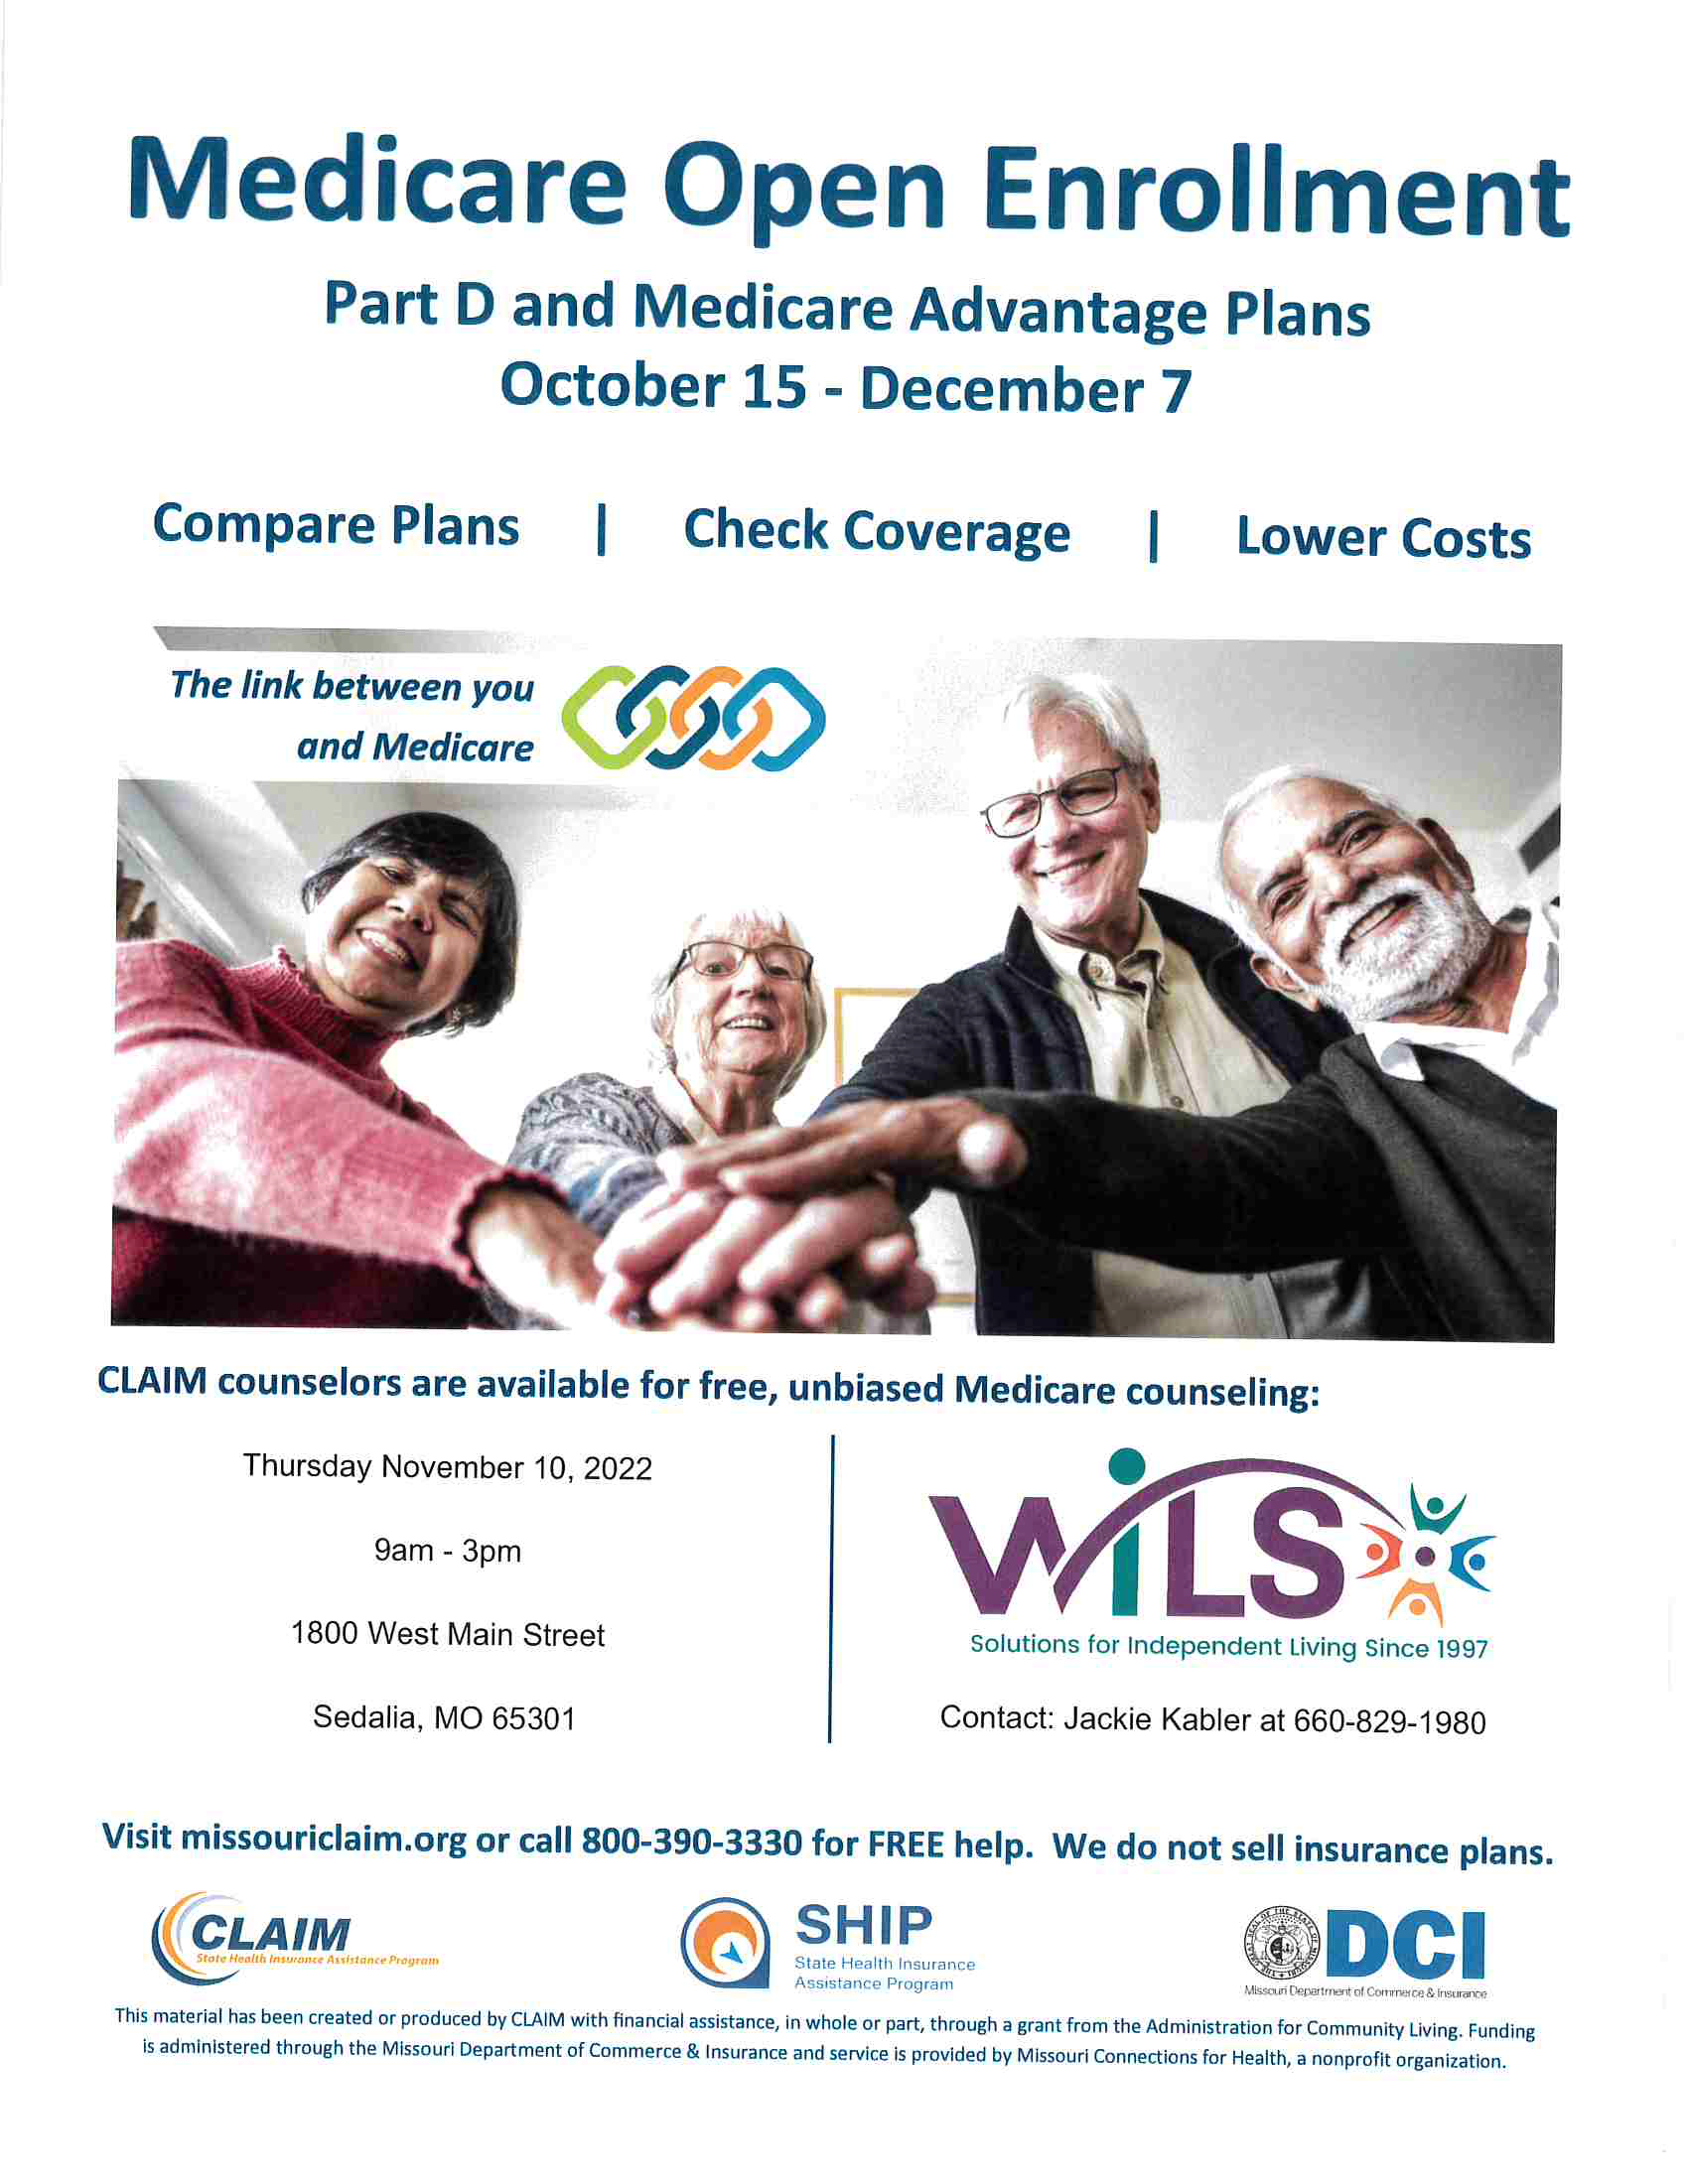 Medicare Open Enrollment  Part D and Medicare Advantage Plans  October 15 - December 7 Compare Plans, Check Coverage, and Lower Costs. CLAIM counselors are available for free, unbiased Medicare counseling at WILS. Jackie Kabler at 660-829-1980. Visit missouriclaim.org or call 800-390-3330 for FREE help. We do not sell insurance plans. Thursday November 10, 2022 9am -3pm  1800 W. Main St. Sedalia, MO